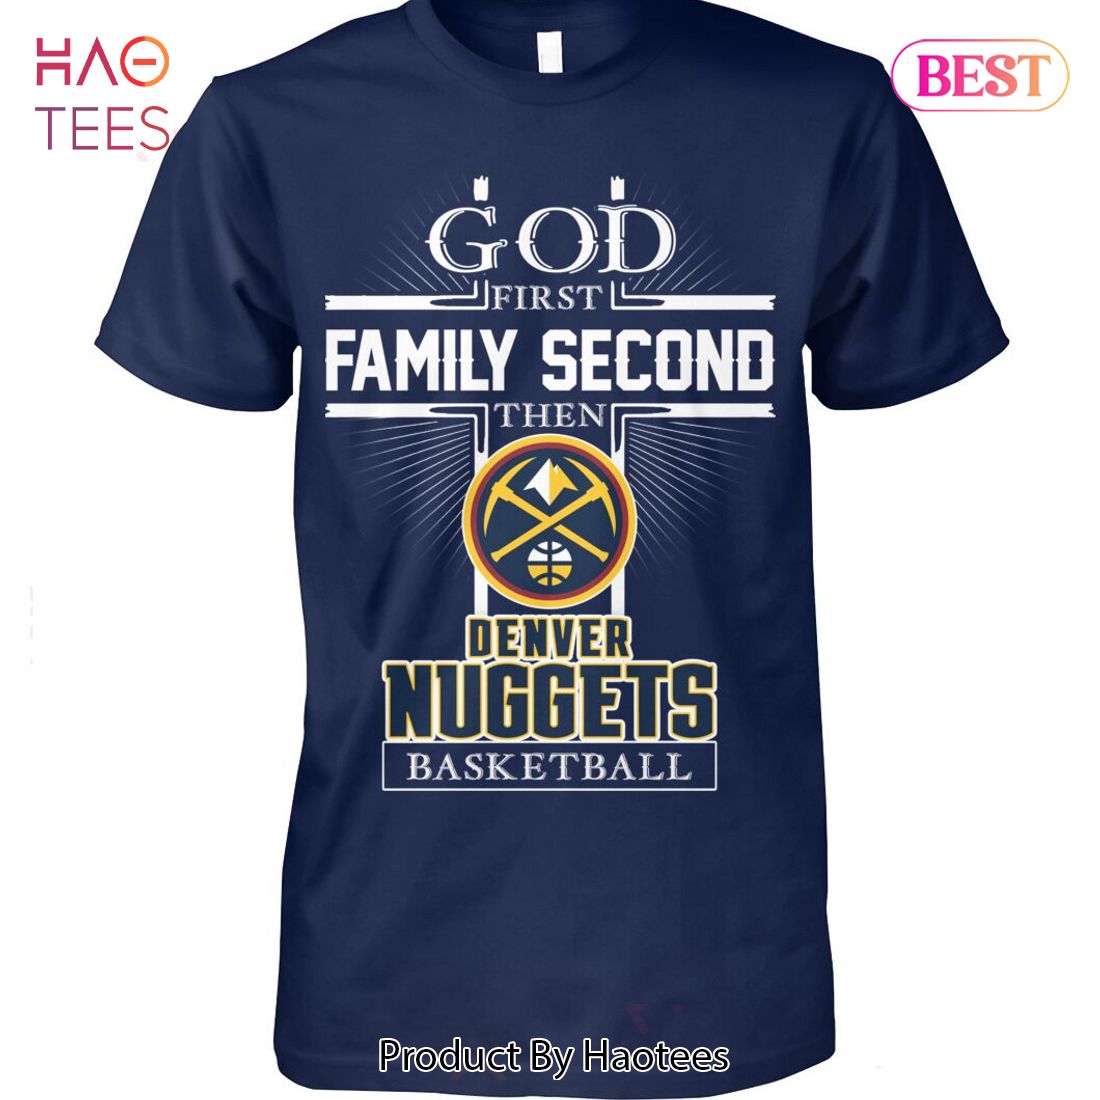 NEW God First Family Second Then Denver Nuggets Basketball Unisex T-Shirt